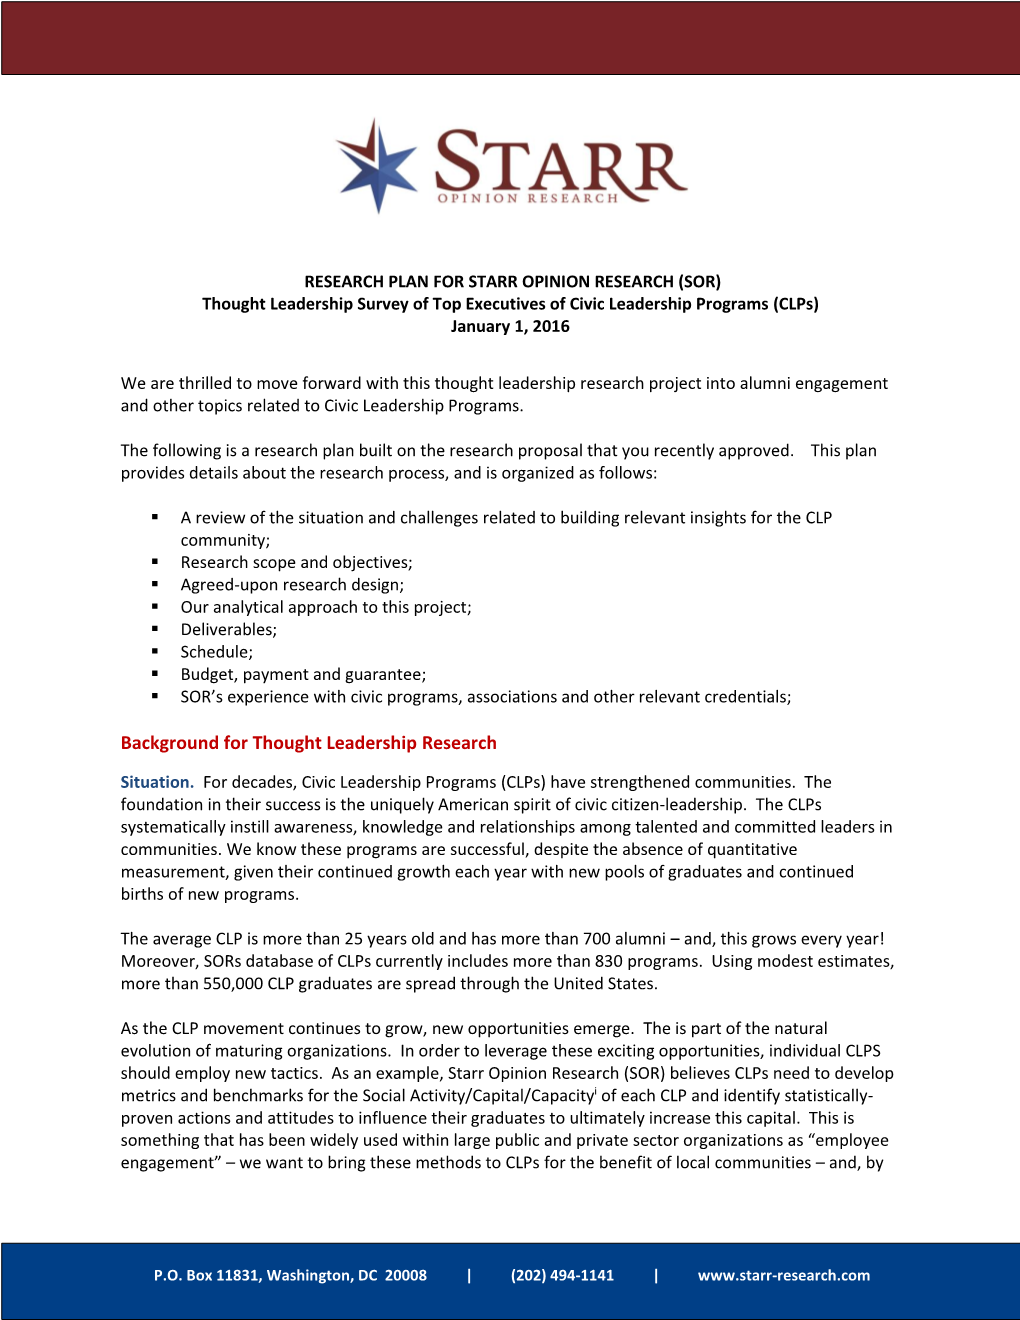 RESEARCH PLAN for STARR OPINION RESEARCH (SOR) Thought Leadership Survey of Top Executives of Civic Leadership Programs (Clps) January 1, 2016